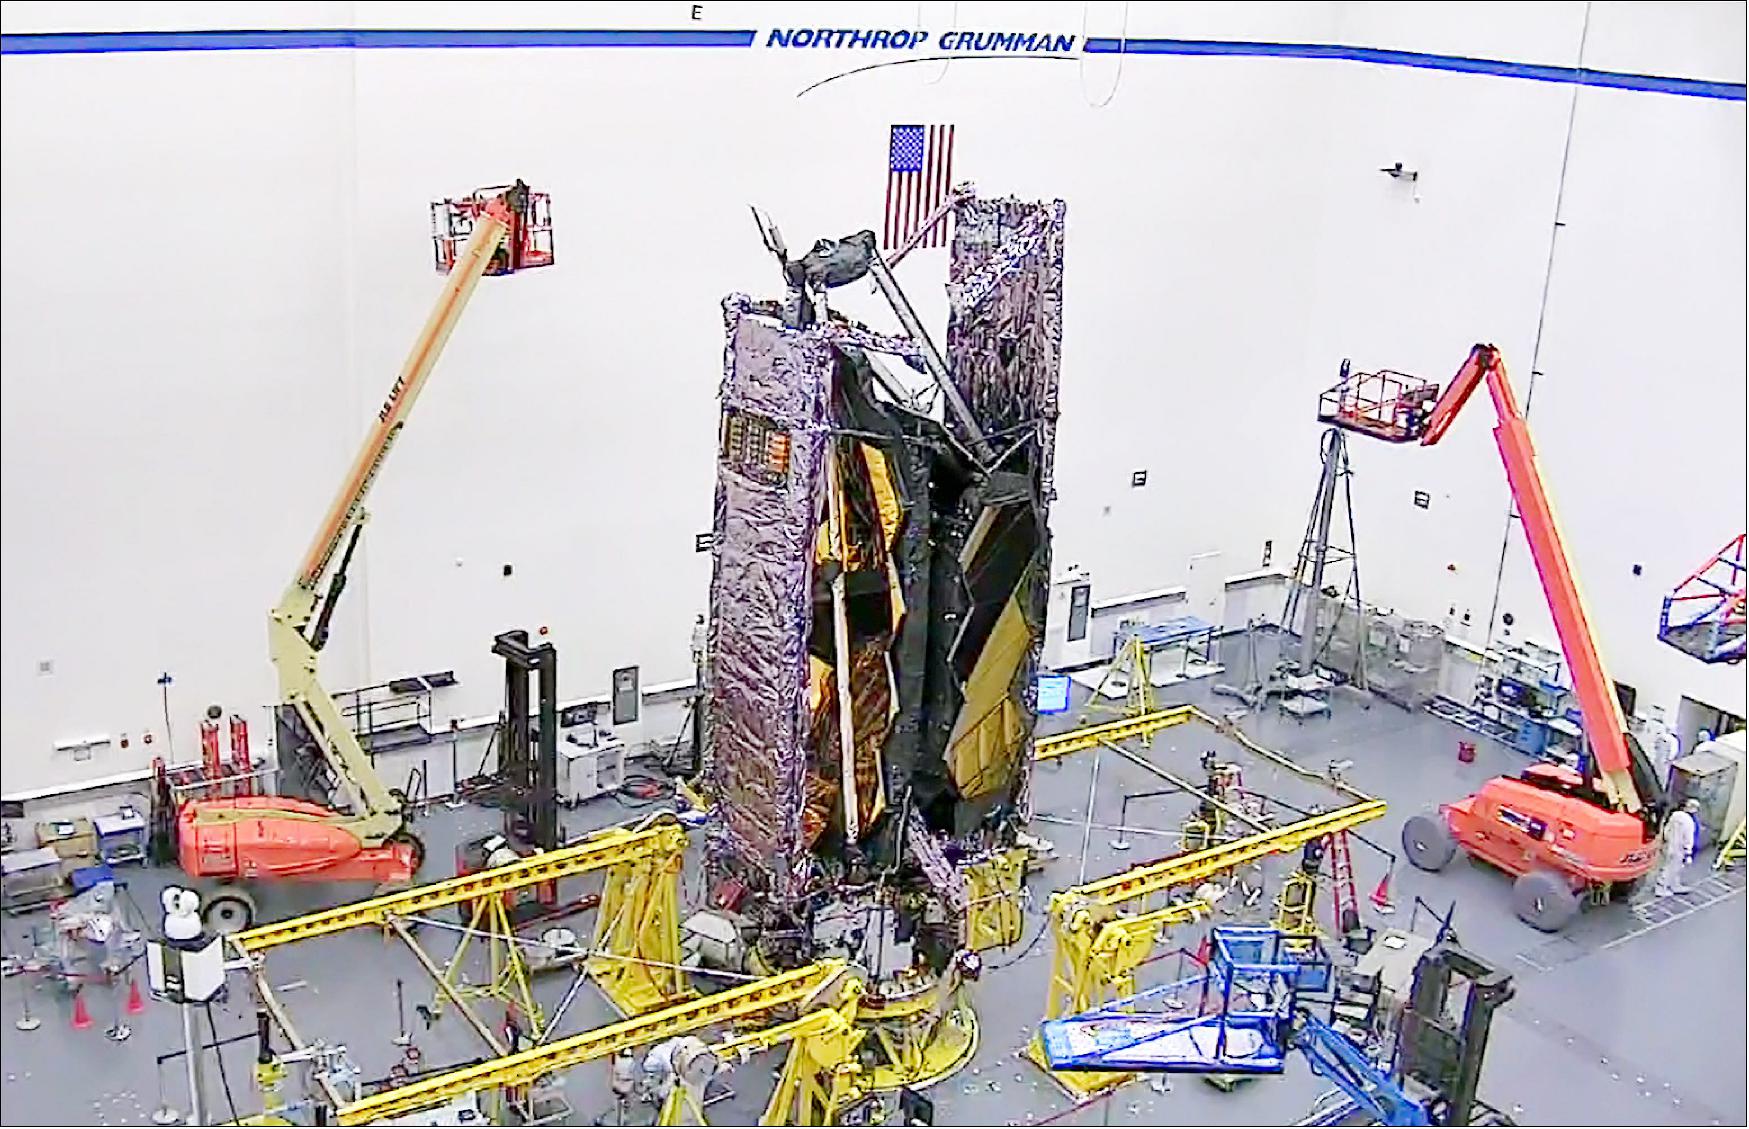 Figure 31: A first look at NASA's James Webb Space Telescope fully stowed into the same configuration it will have when loaded into an Ariane V rocket for launch. The image was taken from a webcam in the clean room at Northrop Grumman, in Redondo Beach, California. With staffing restrictions in place due to COVID-19, only essential staff are allowed in the clean room (image credit: Northrop Grumman)